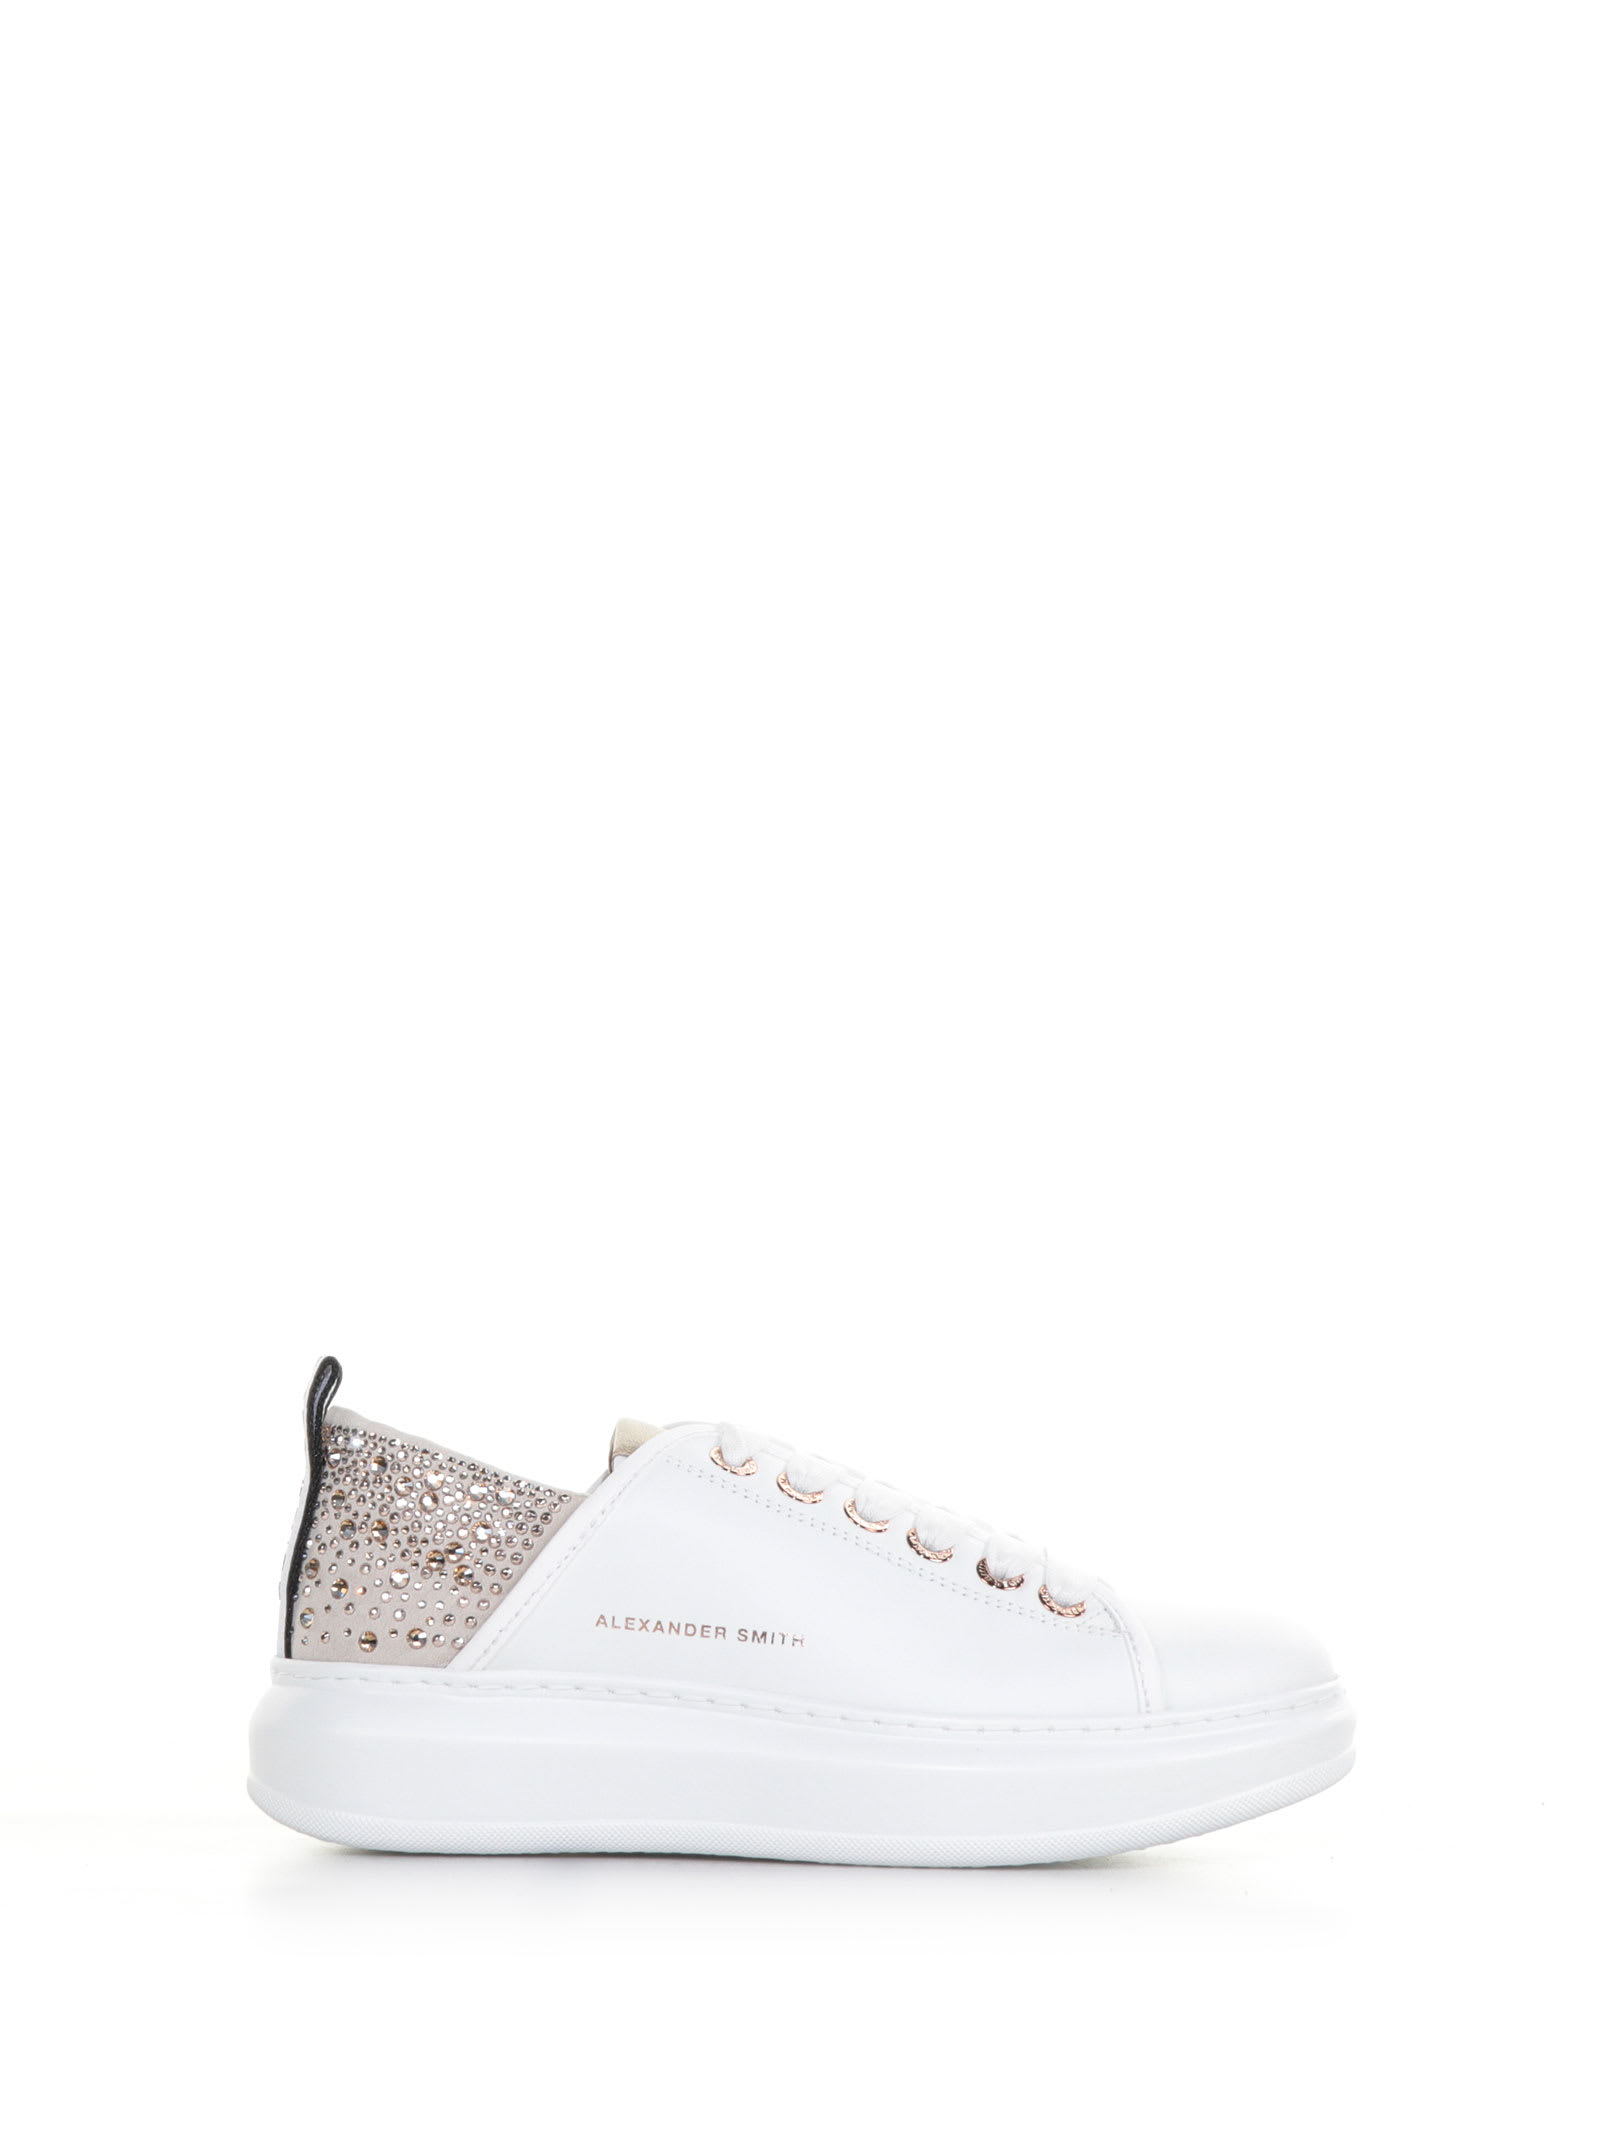 Alexander Smith Sneakers In Leather And Rhinestones On The Heel In Bianco /platino